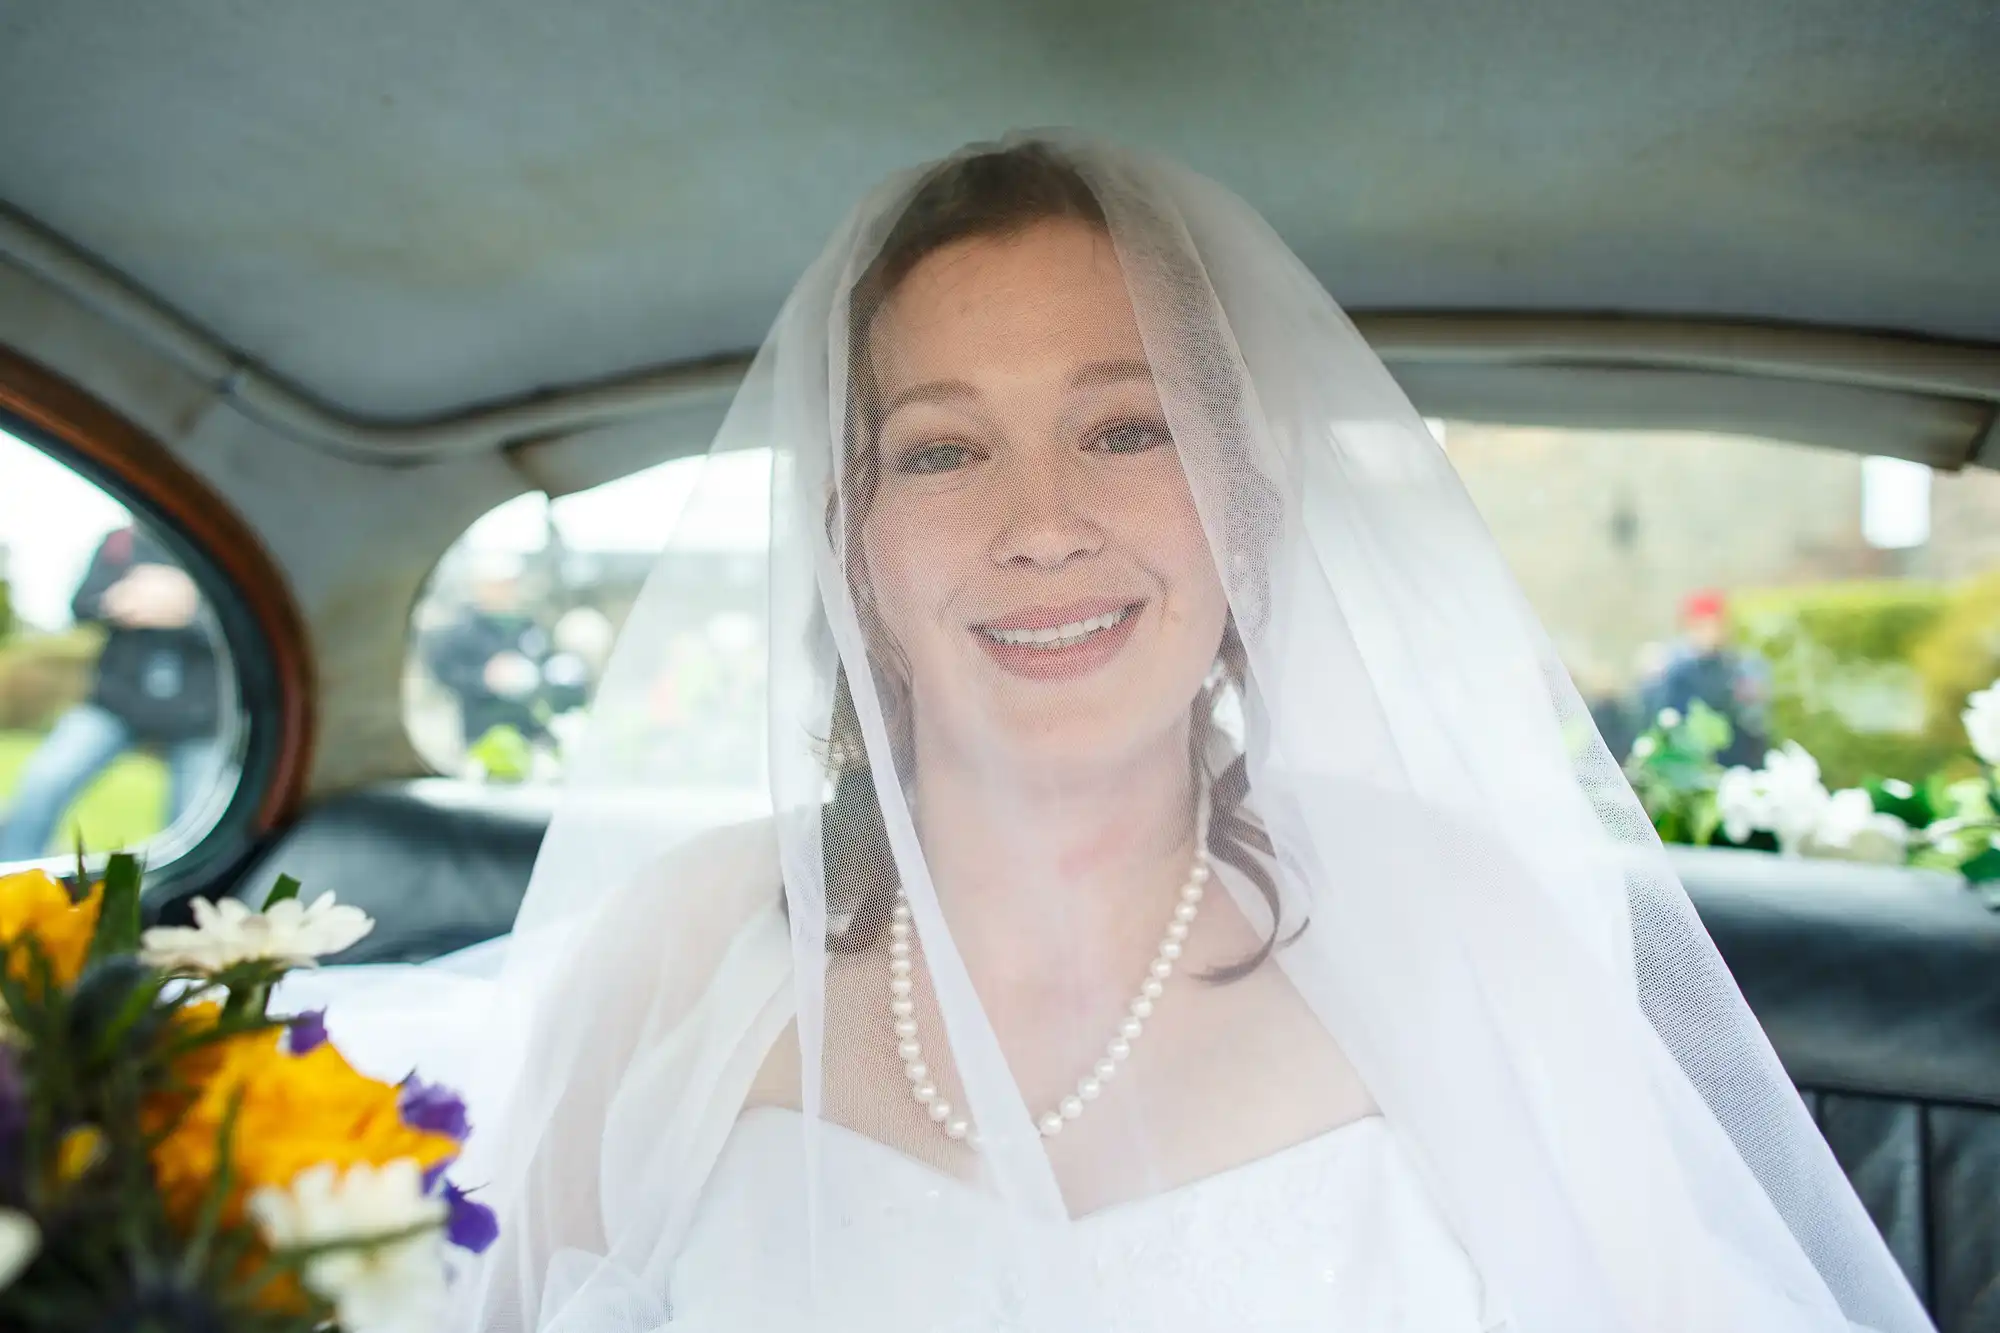 A bride in a wedding dress and veil smiles inside a vintage car, with visible flowers on the dashboard.